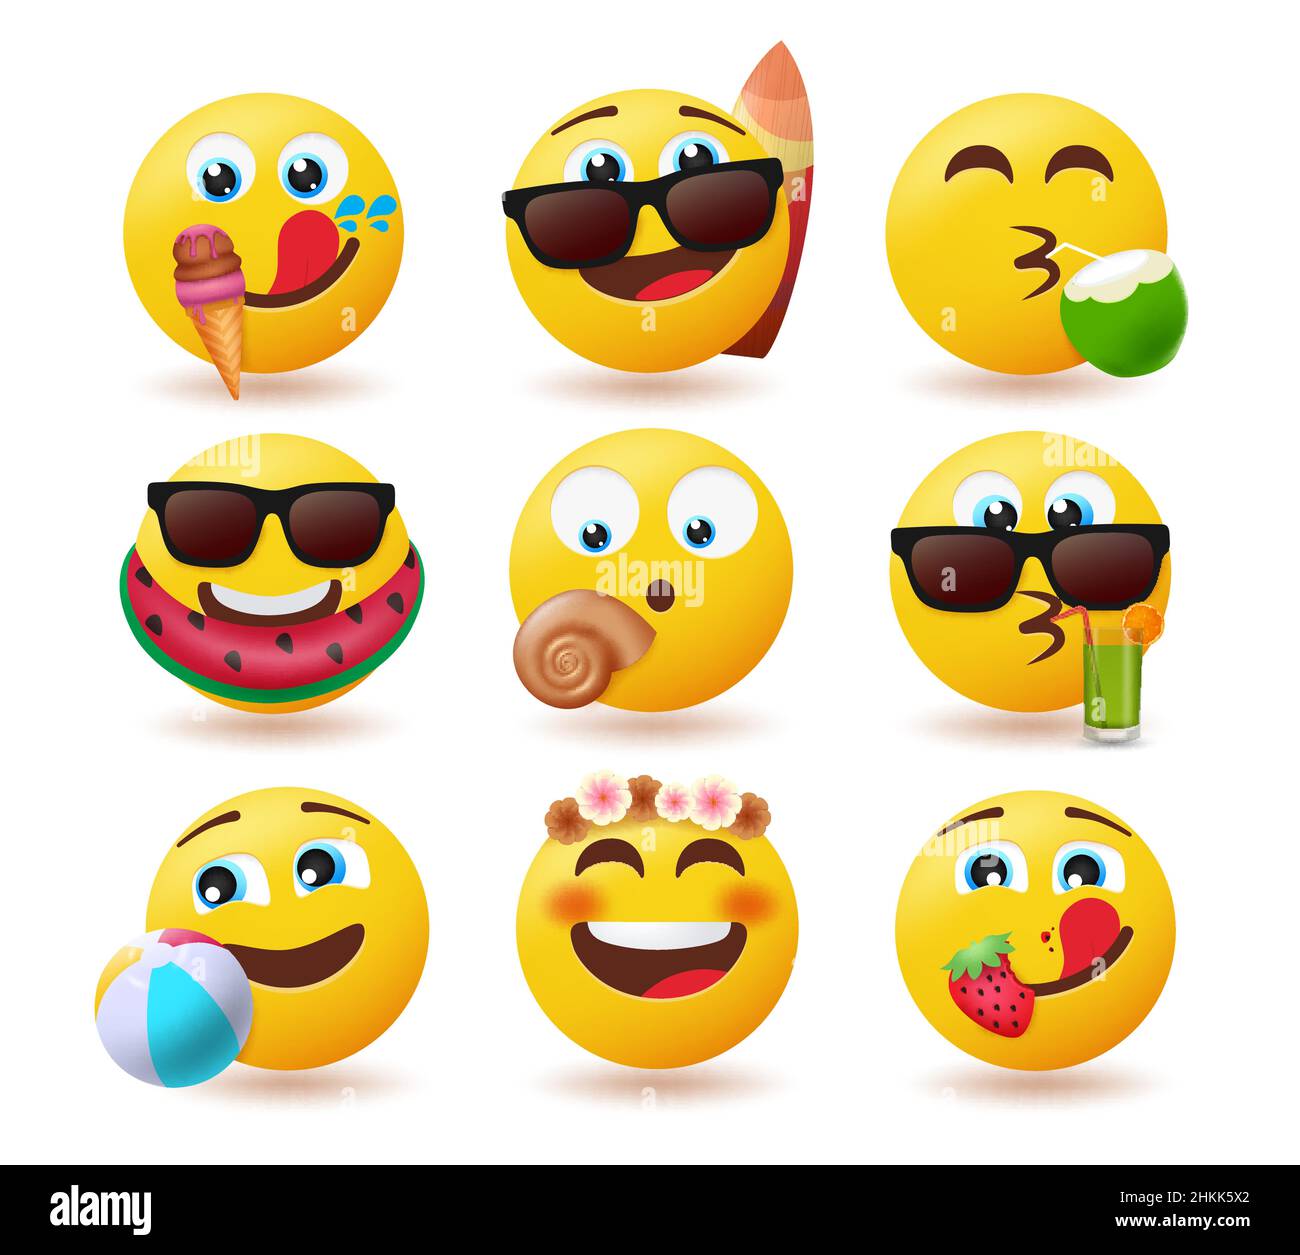 Emoji summer emoticon vector set. Emojis characters with summer elements of juice, fruits and floater for tropical season cute emoticons collection. Stock Vector